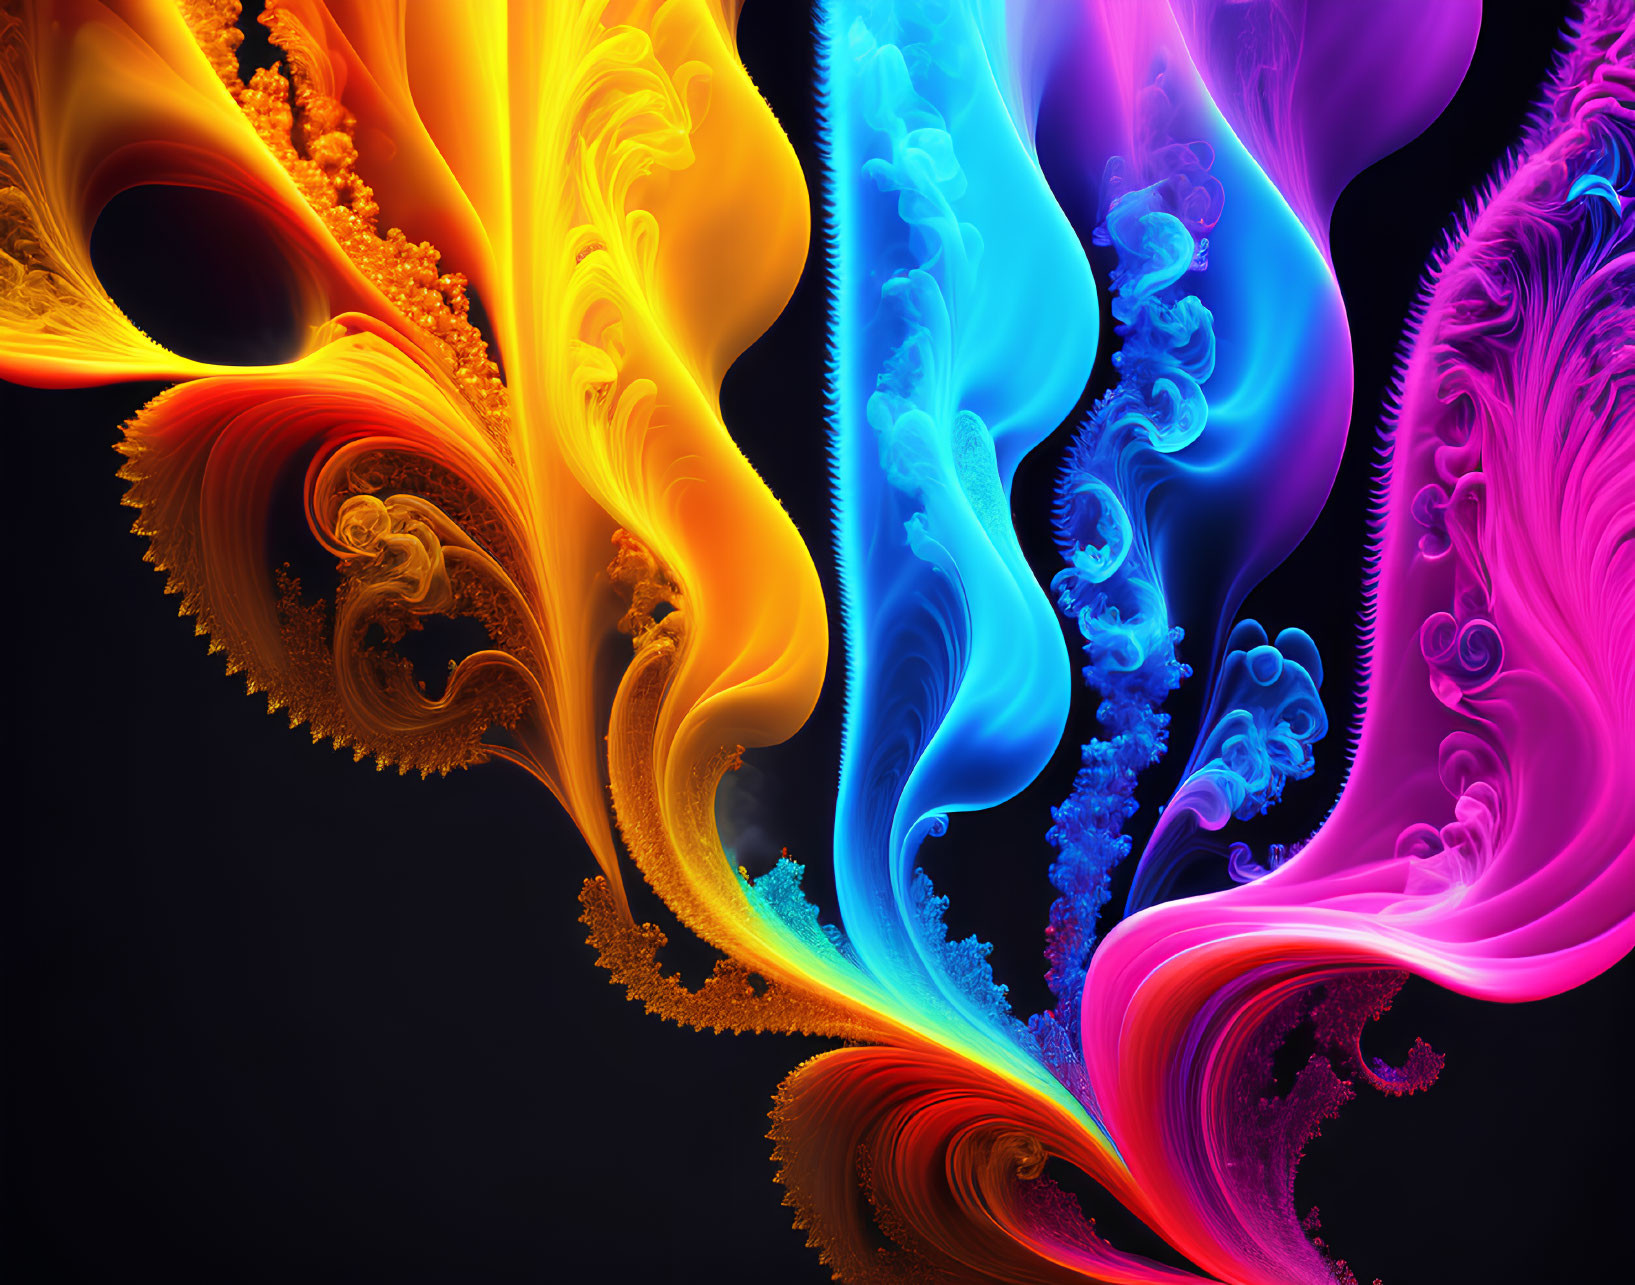 Colorful Abstract Fractal Art: Rainbow Swirls on Black Background